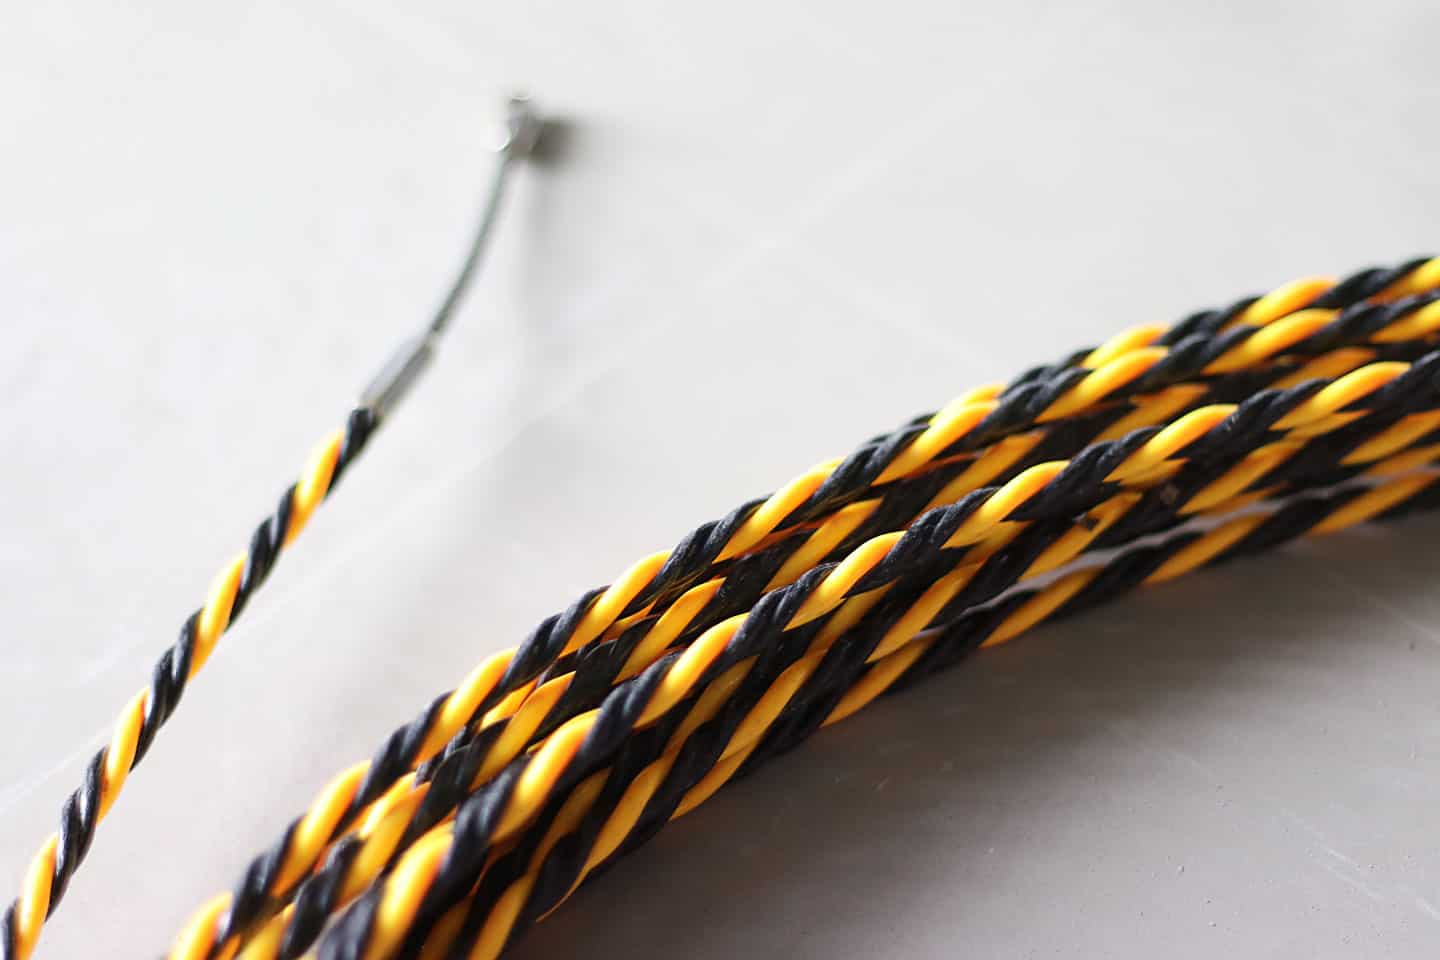 9 Best Wire Fishing Tools: Top Picks for Cable Management - C&C